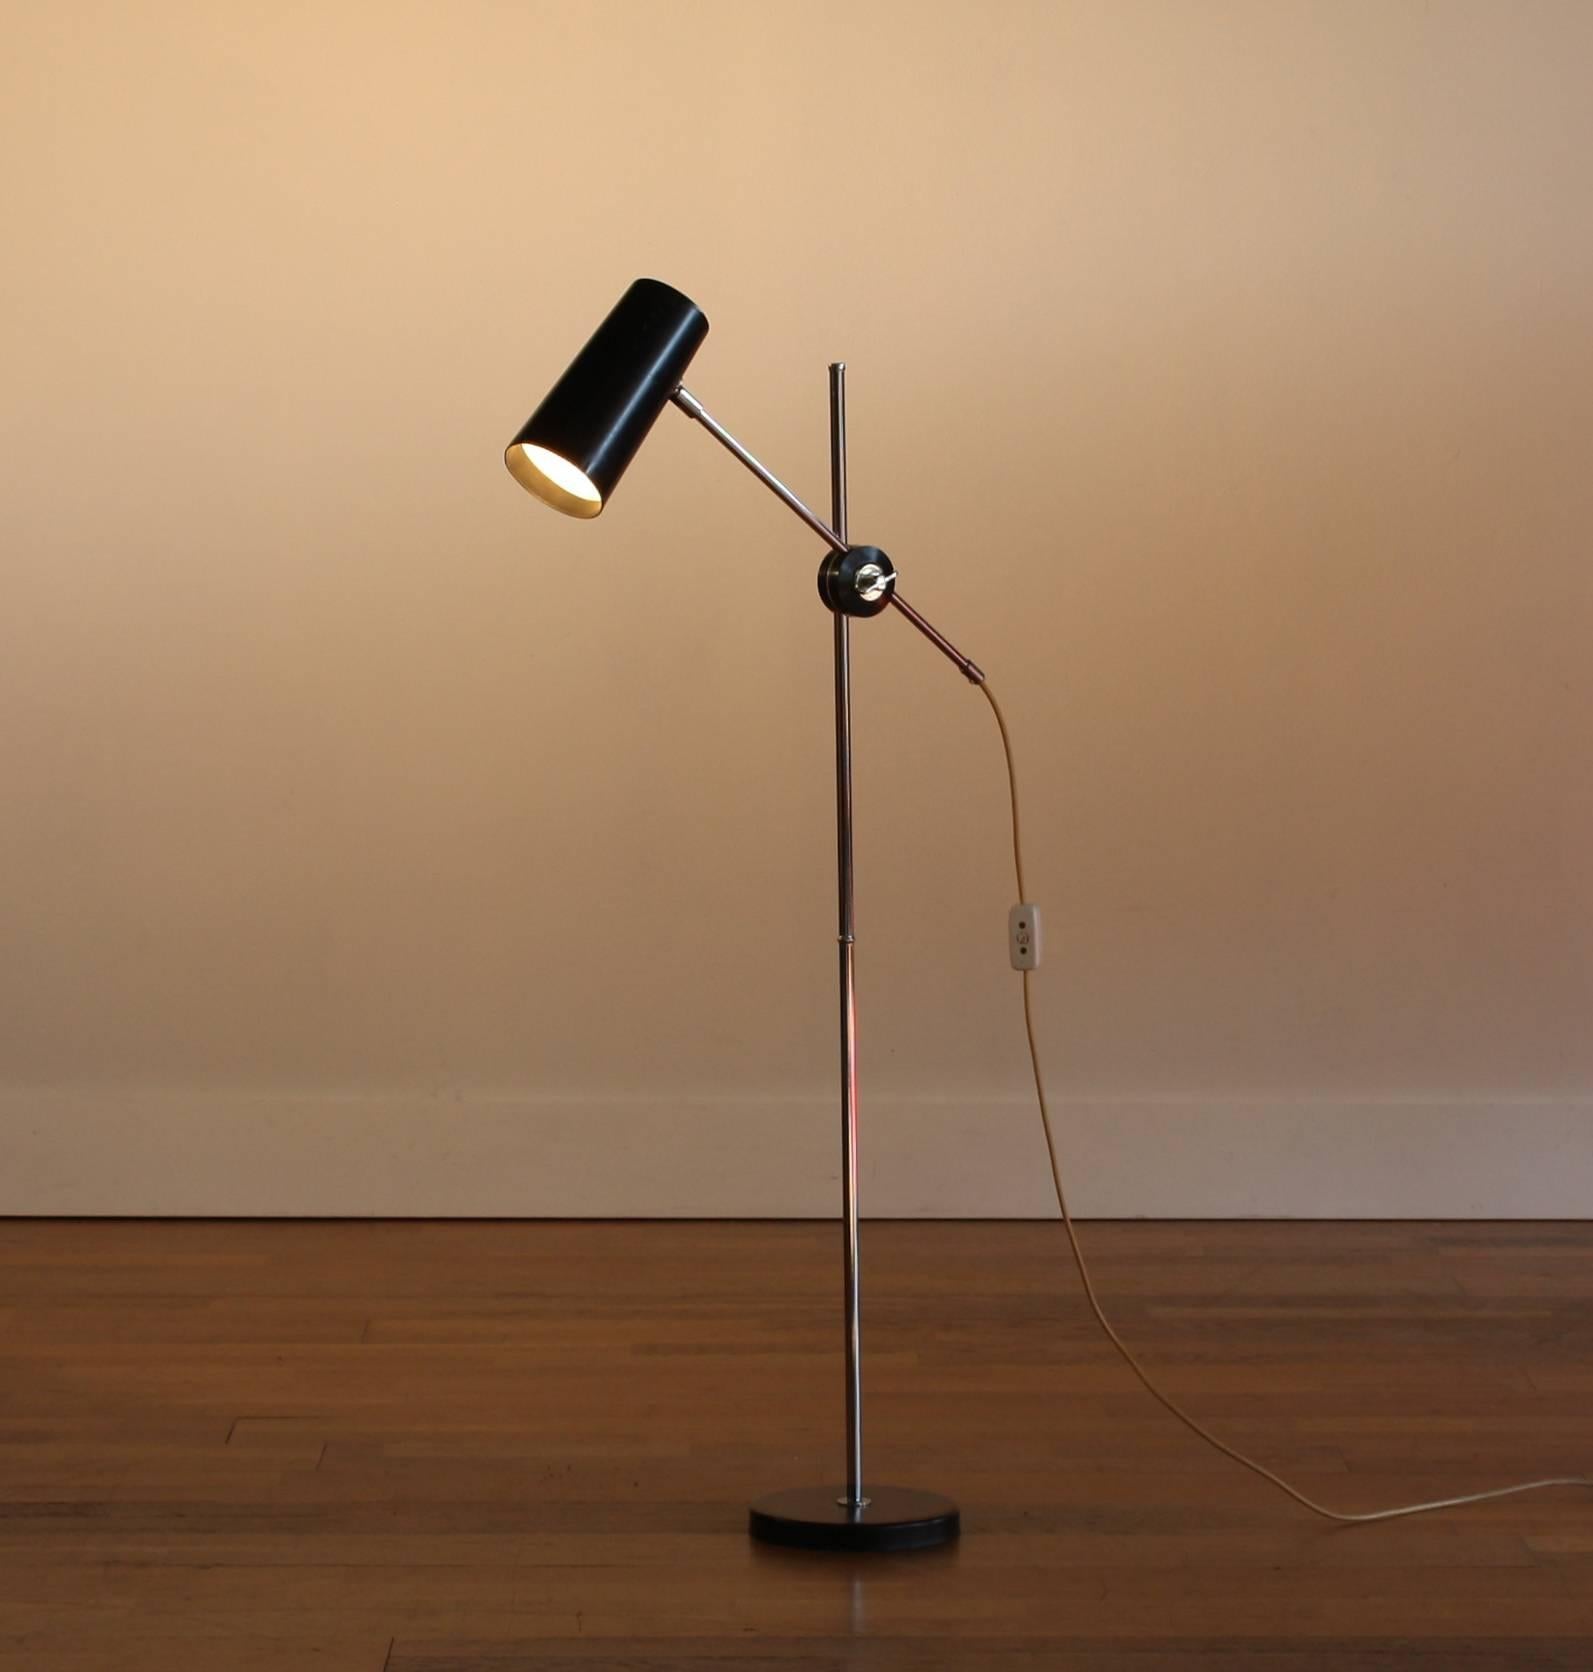 Beautiful floor black floor lamp.
This lamp is designed by Anders Pehrson and produced by Ateljé Lyktan Sweden.
The lamp is adjustable and has a black hood and foot, the Stand is of chrome.
It is in a good condition.
Period 1960 dimensions: H